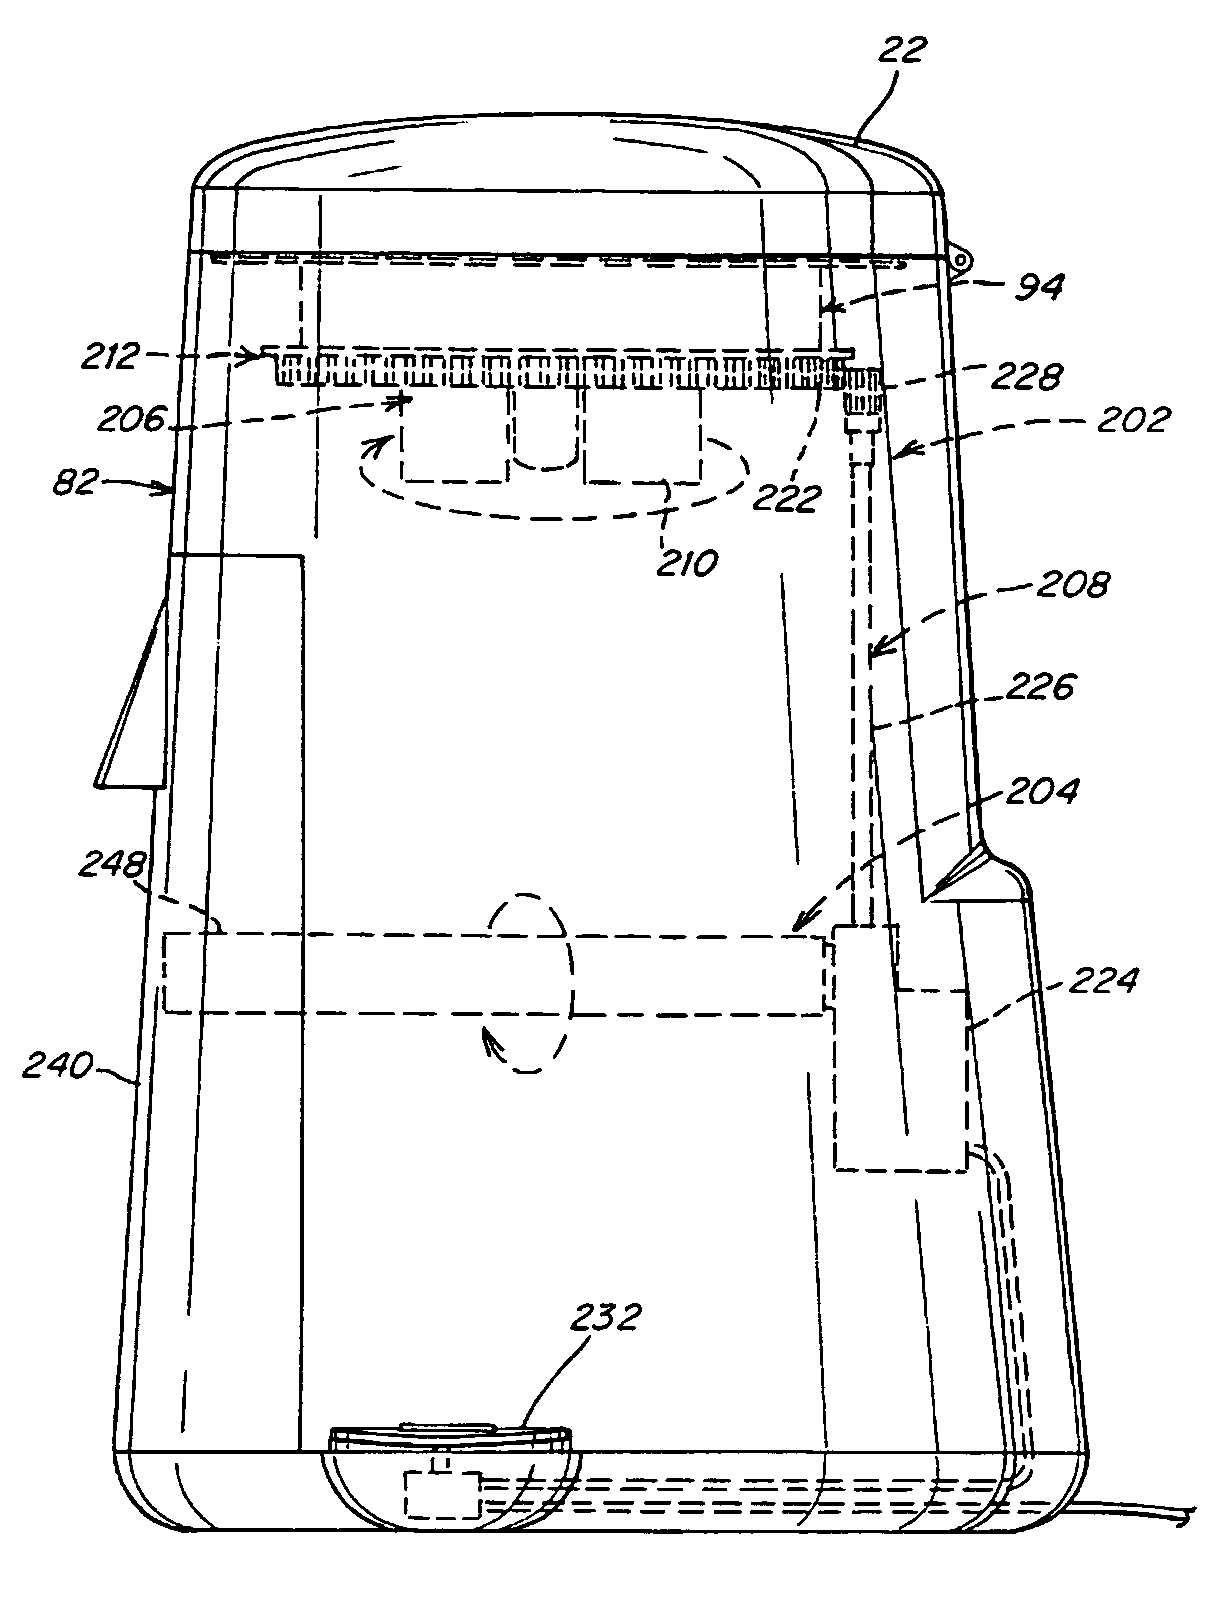 Waste disposal device including rotating cartridge coupled to lid